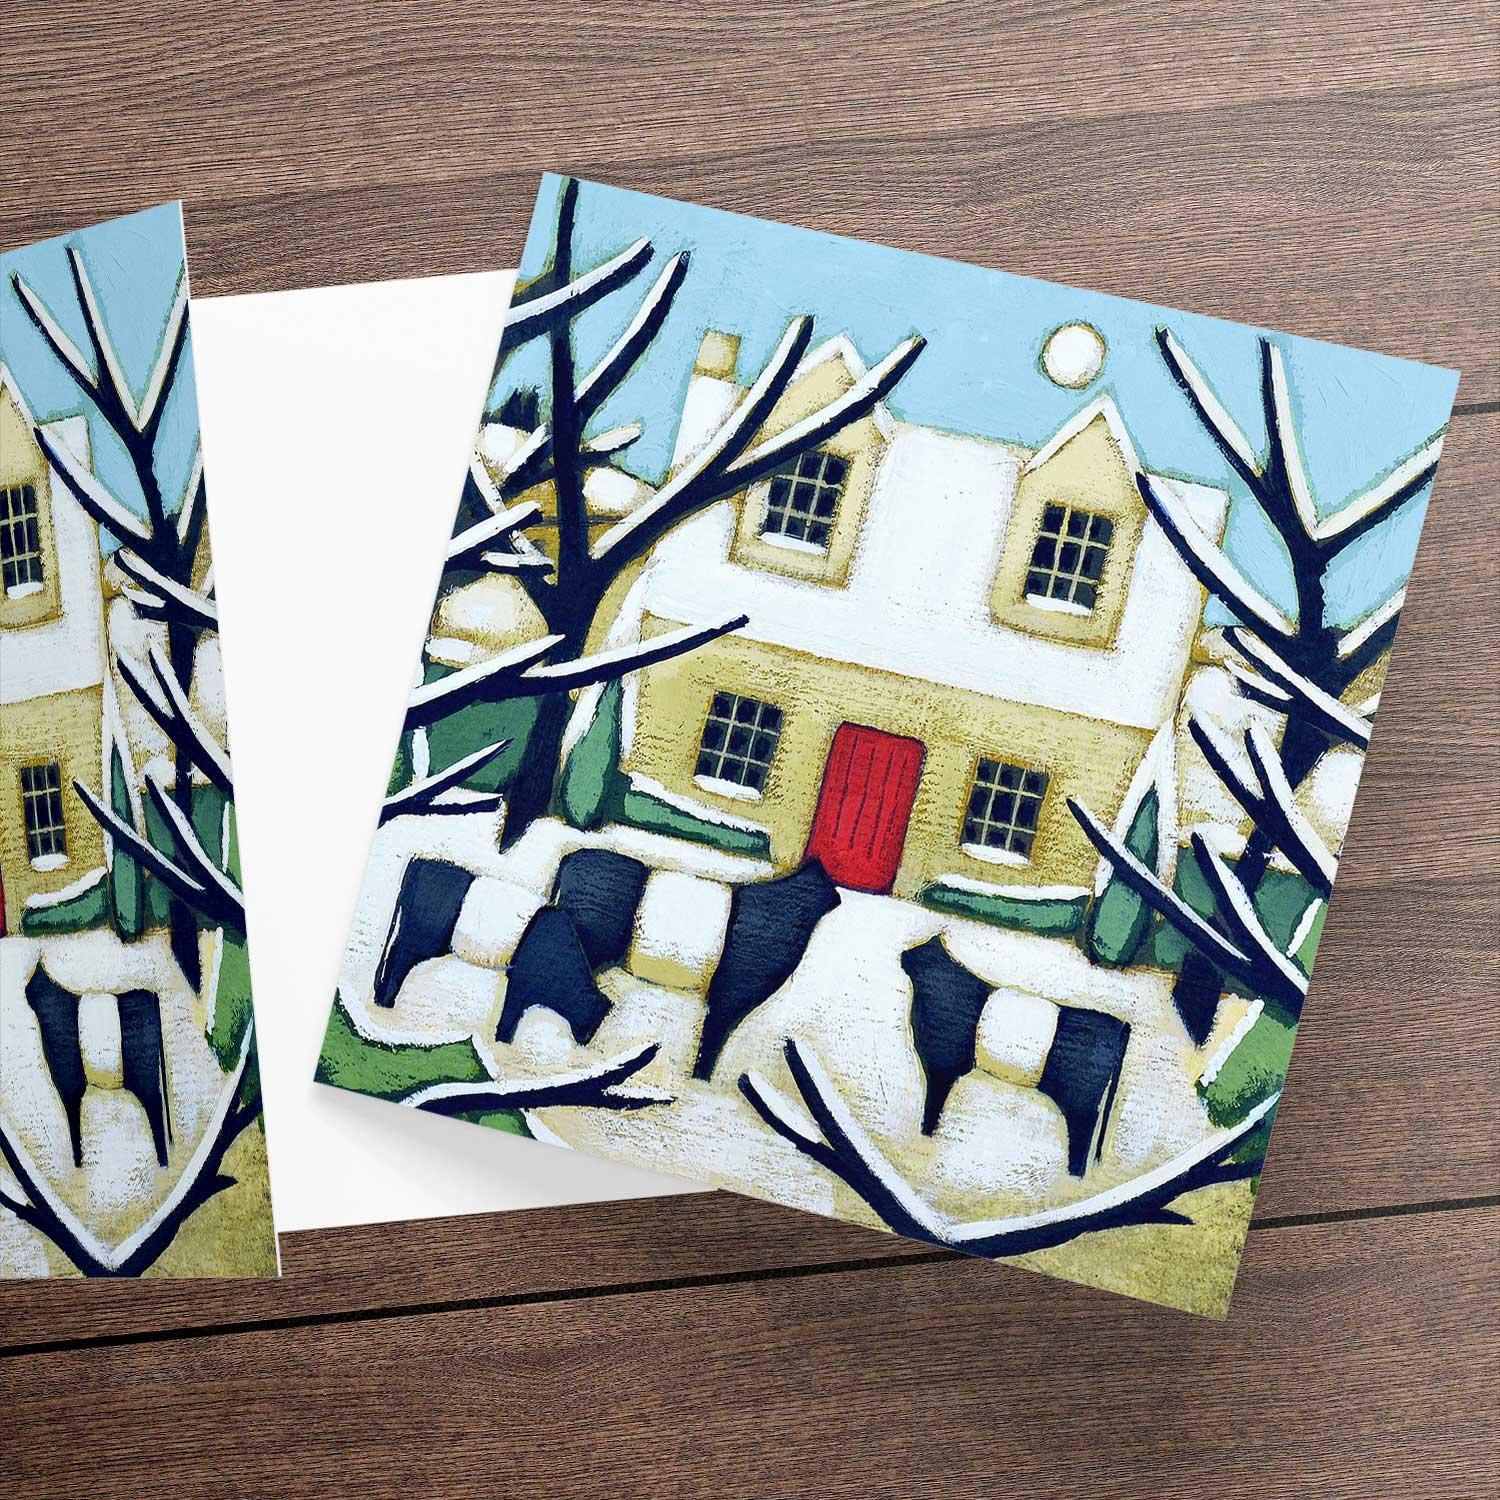 Winter Greeting Card from an original painting by artist Fiona Millar